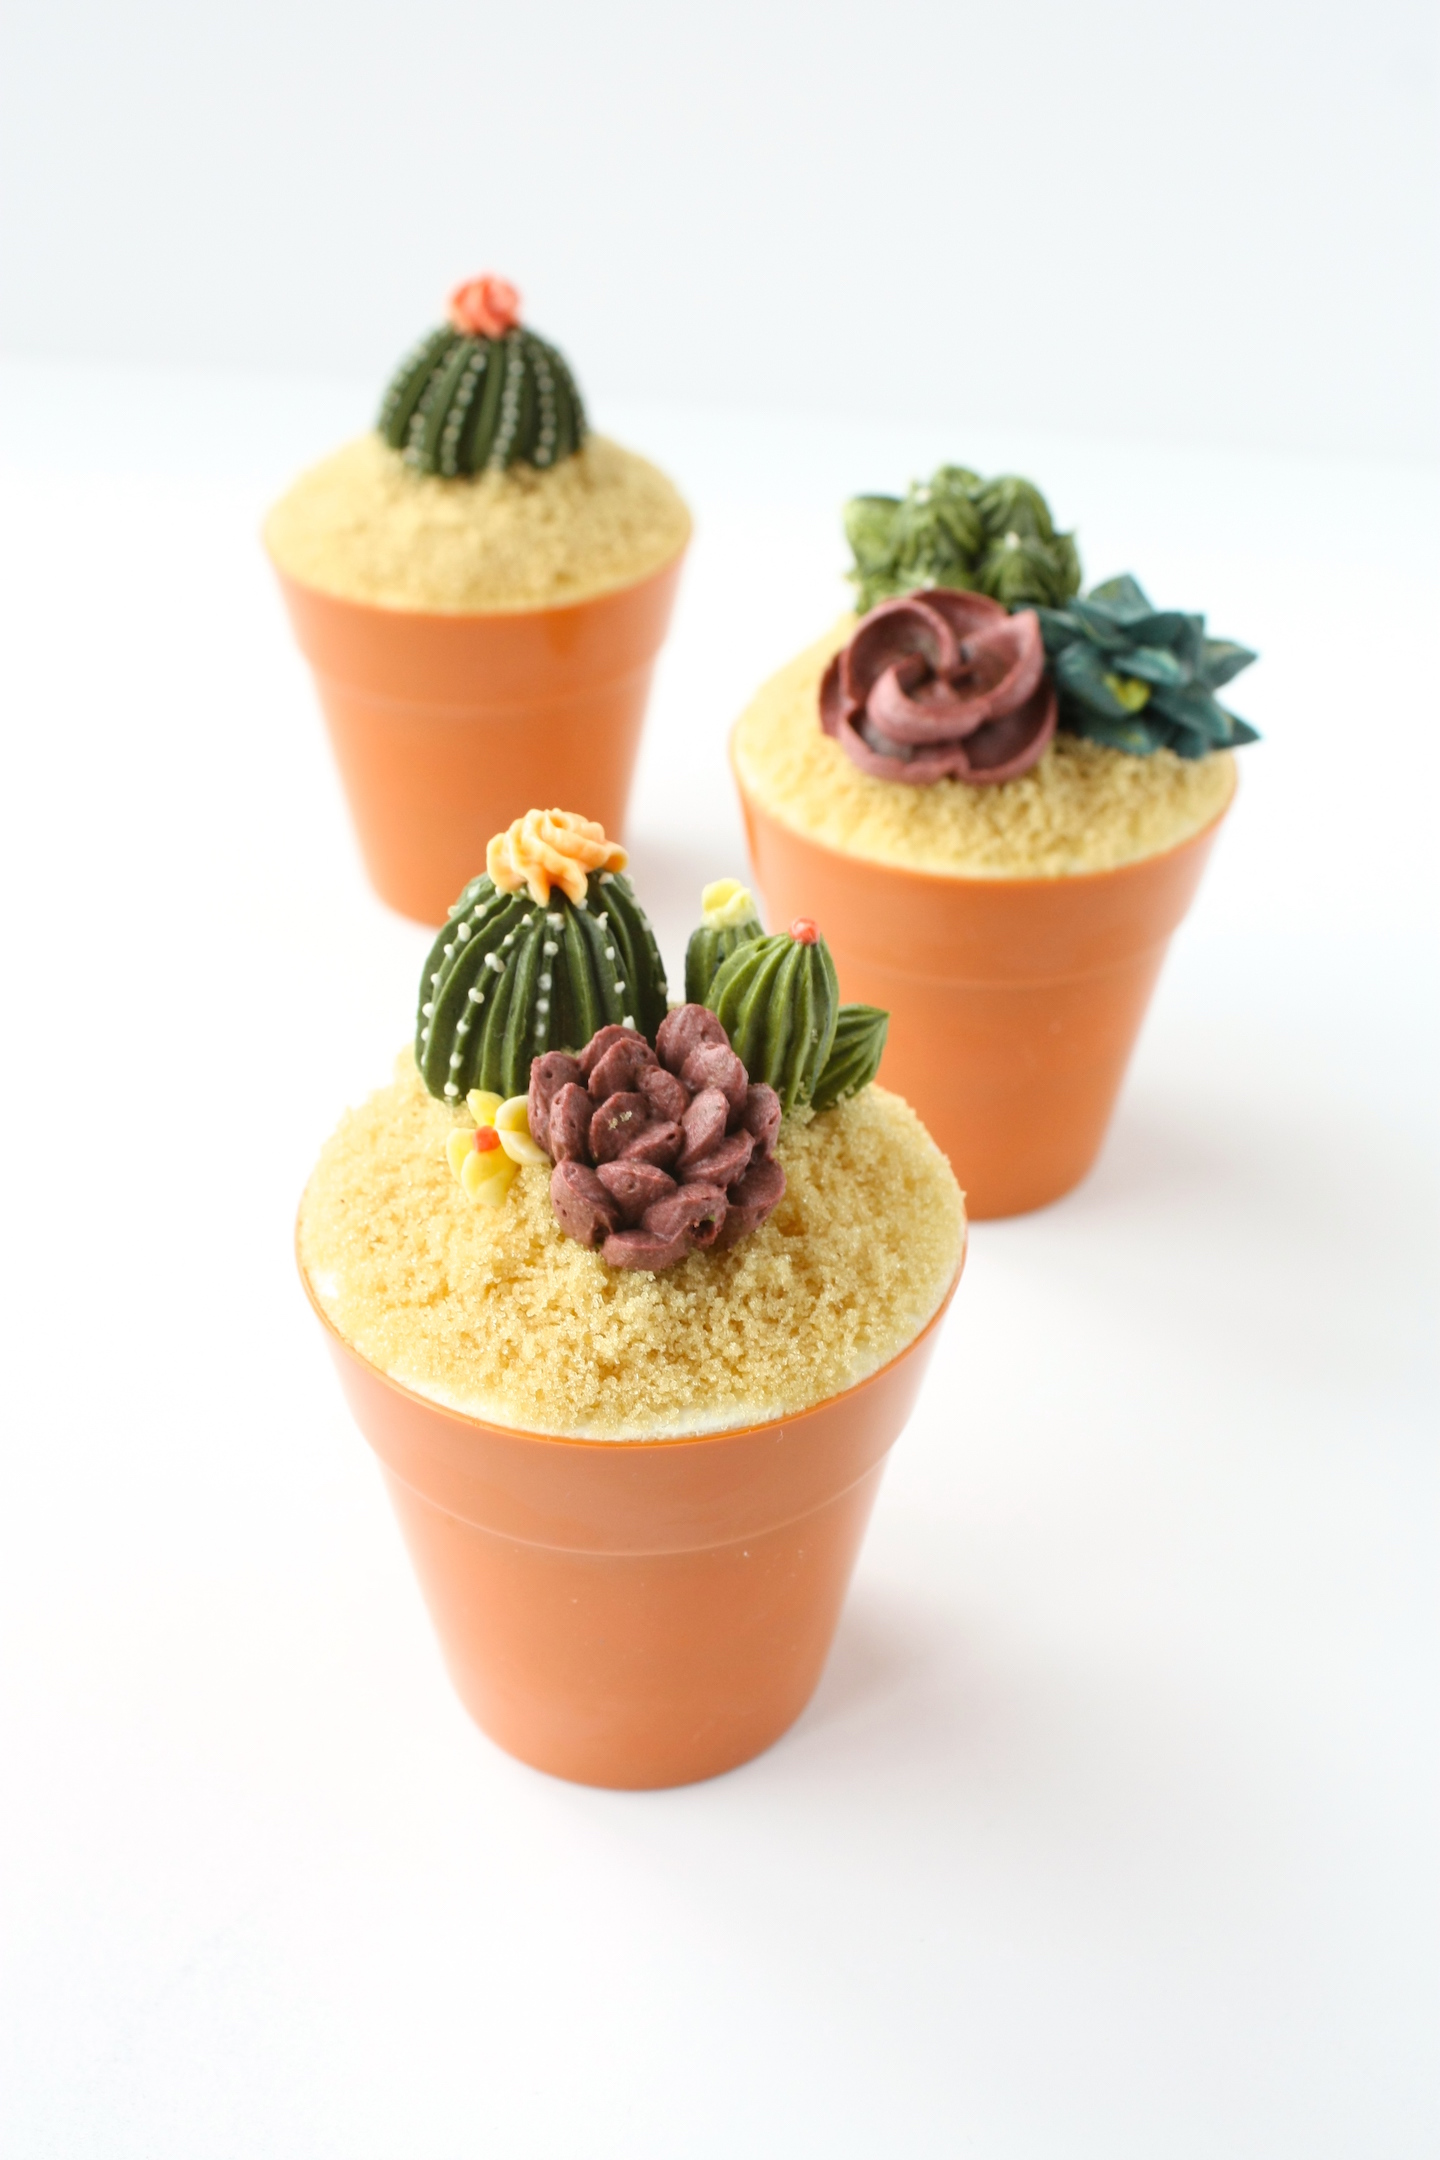 Piped Buttercream Cactus And Succulents by Liz Shim | Erin Gardner | Bluprint